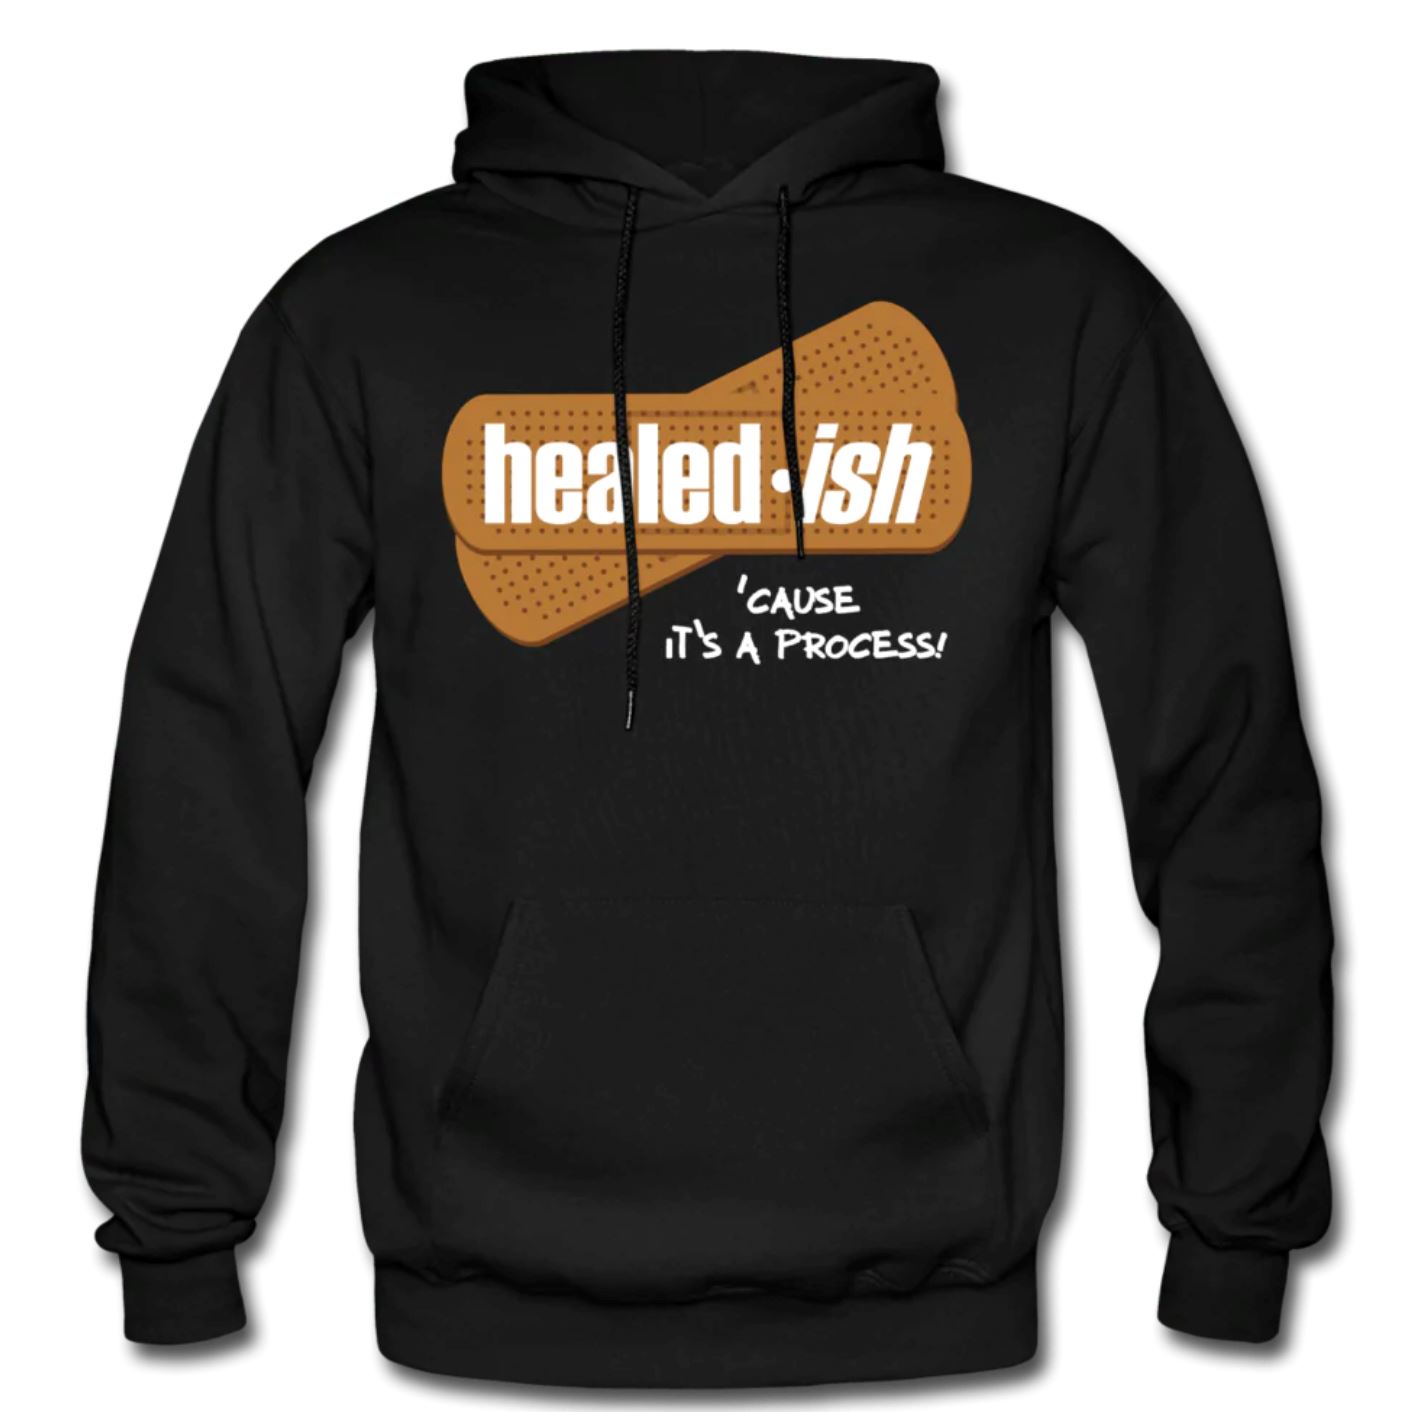 Healed-ish: cause It's a Process Hoodie (Unisex) Flower Power Packages 